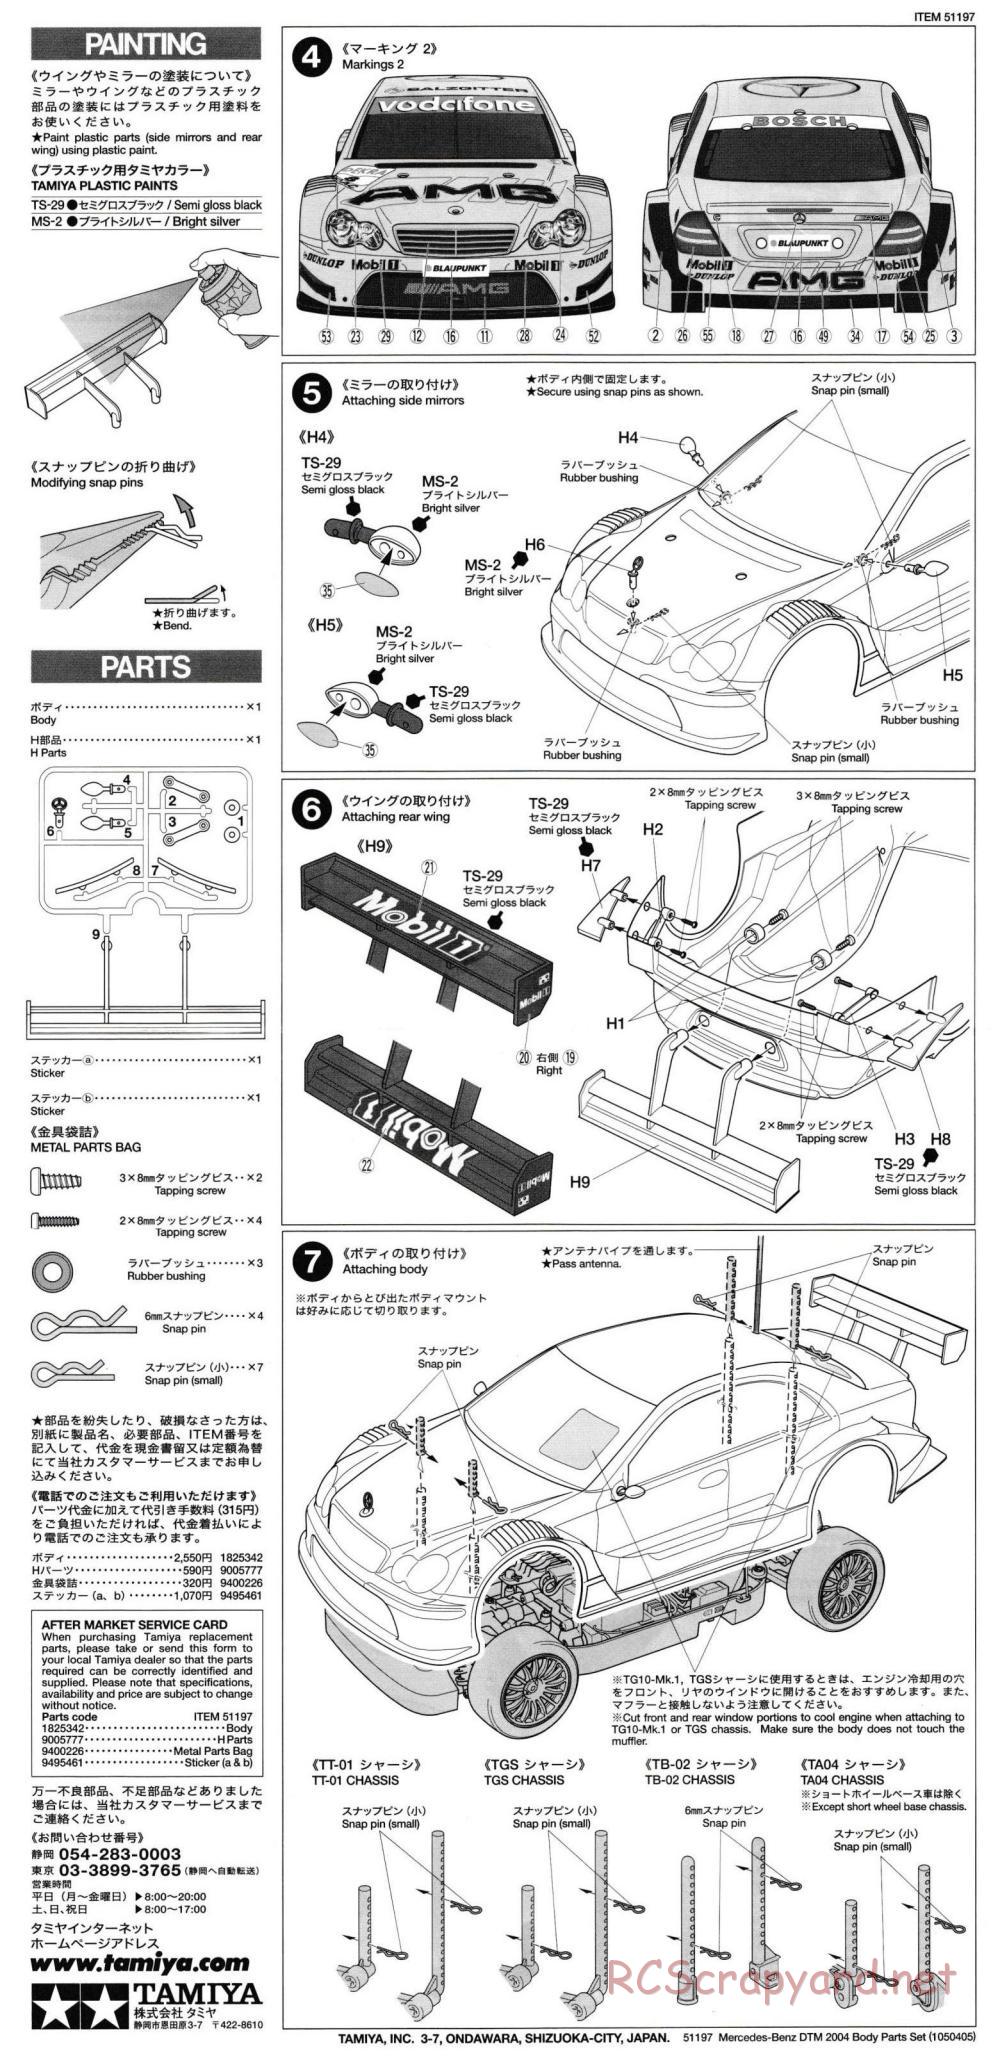 Tamiya - Mercedes Benz C-Class DTM 2004 - TA05 Chassis - Body Manual - Page 2